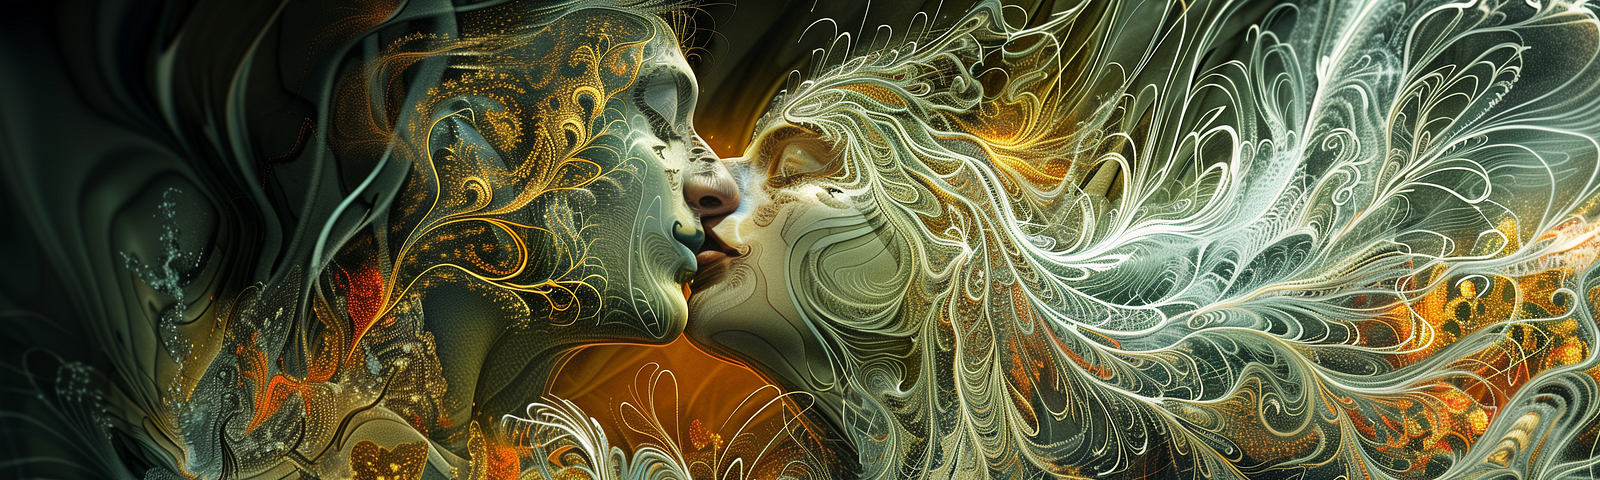 An abstract, ethereal illustration of two figures kissing, their forms intertwined in a swirling, intricate dance of light and shadow, evoking a sense of cosmic connection.